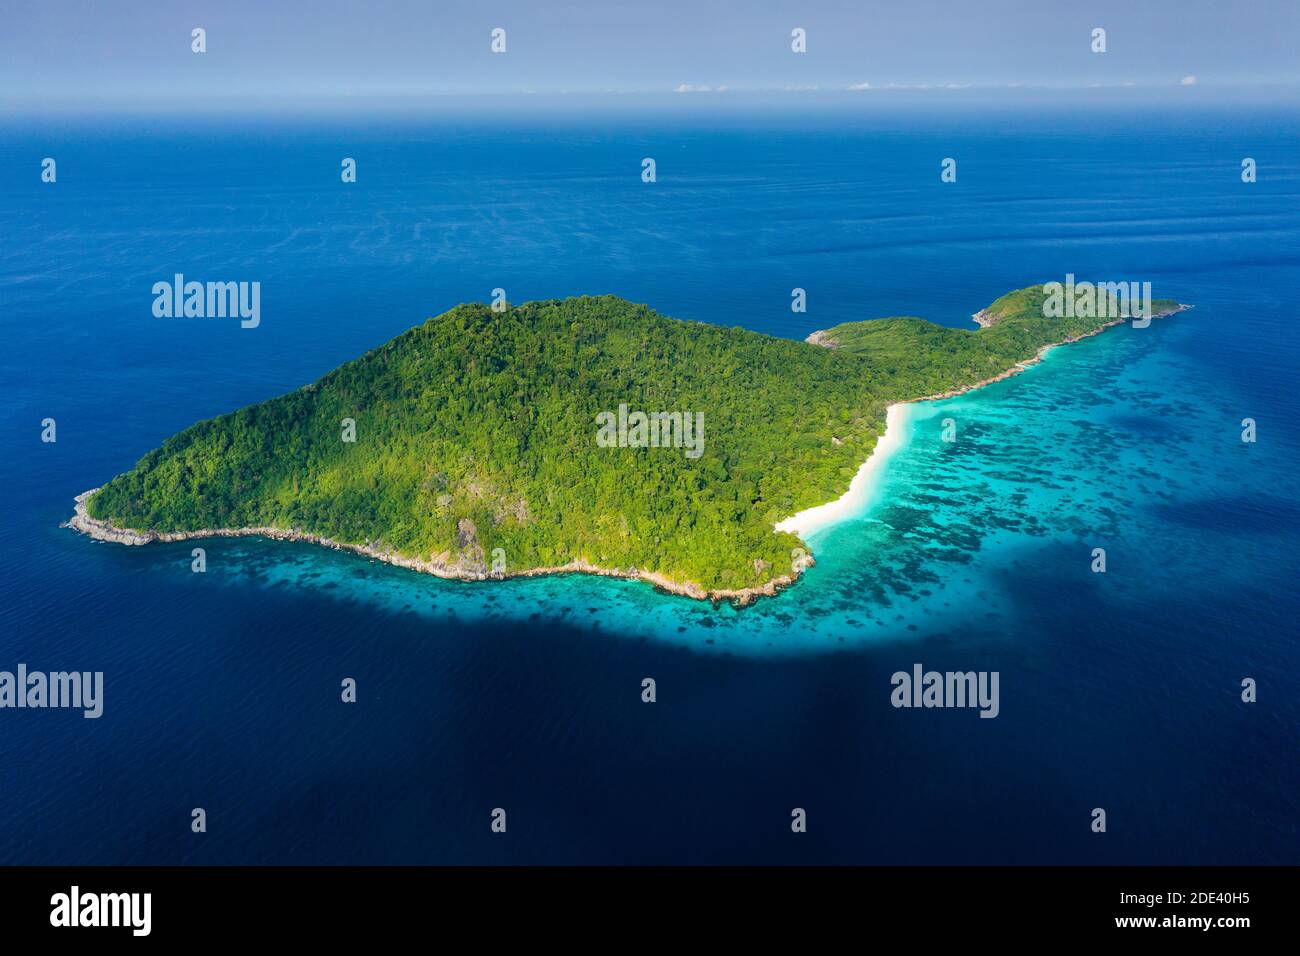 Aerial view of a deserted beach on a rugged tropical island surrounded by coral reef (Koh Tachai). Stock Photo